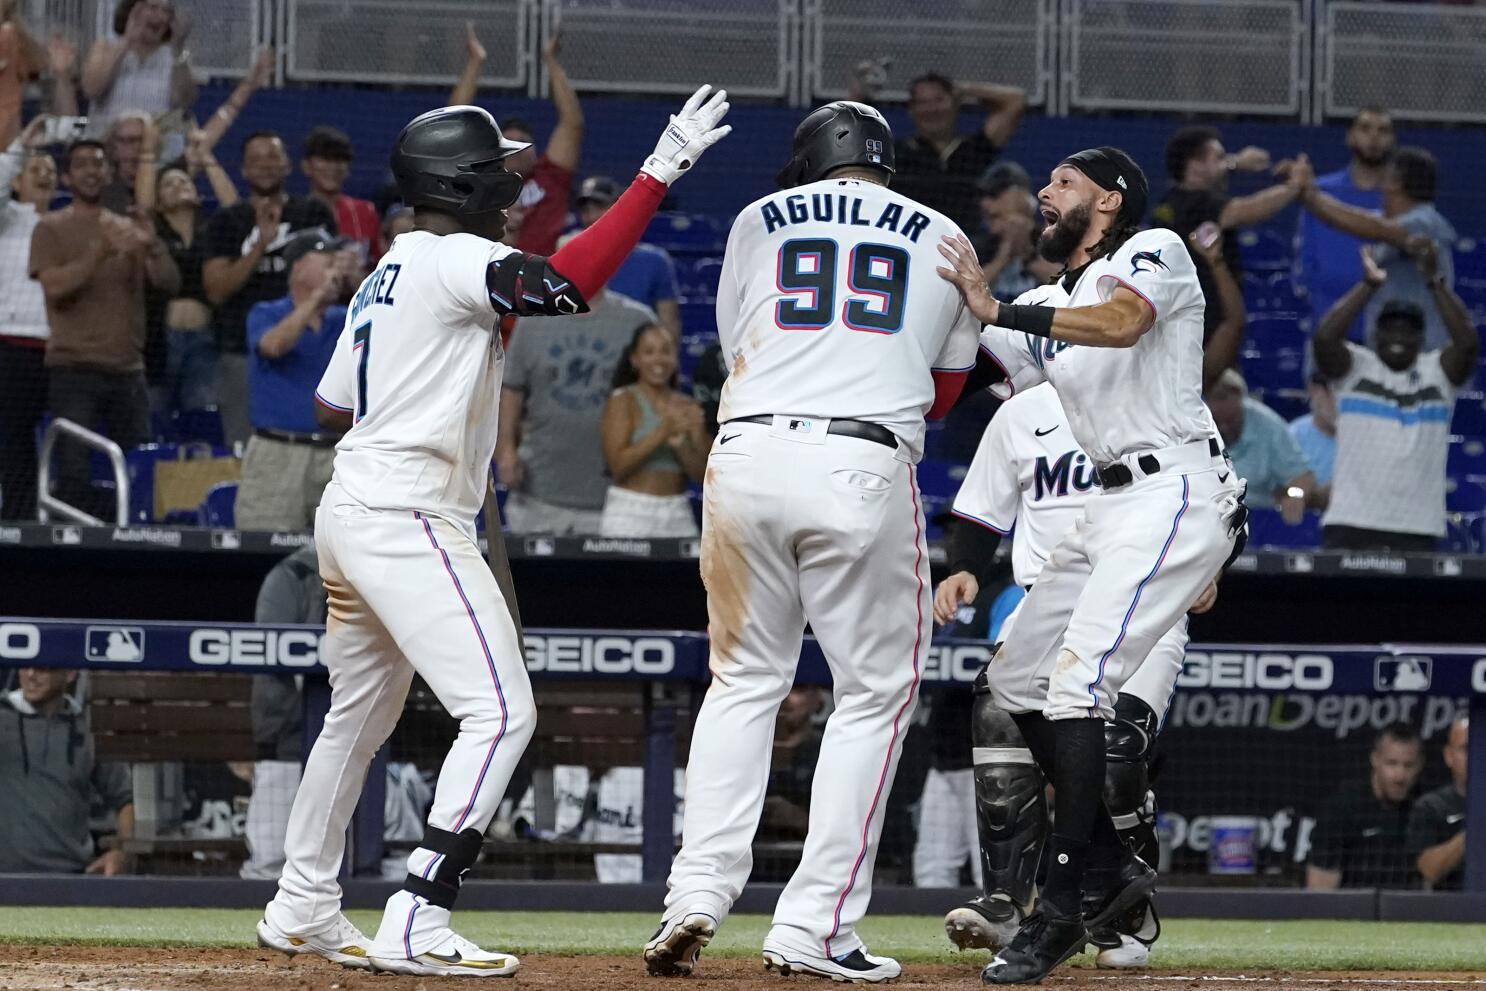 Rangers rally past Marlins for 5th straight win